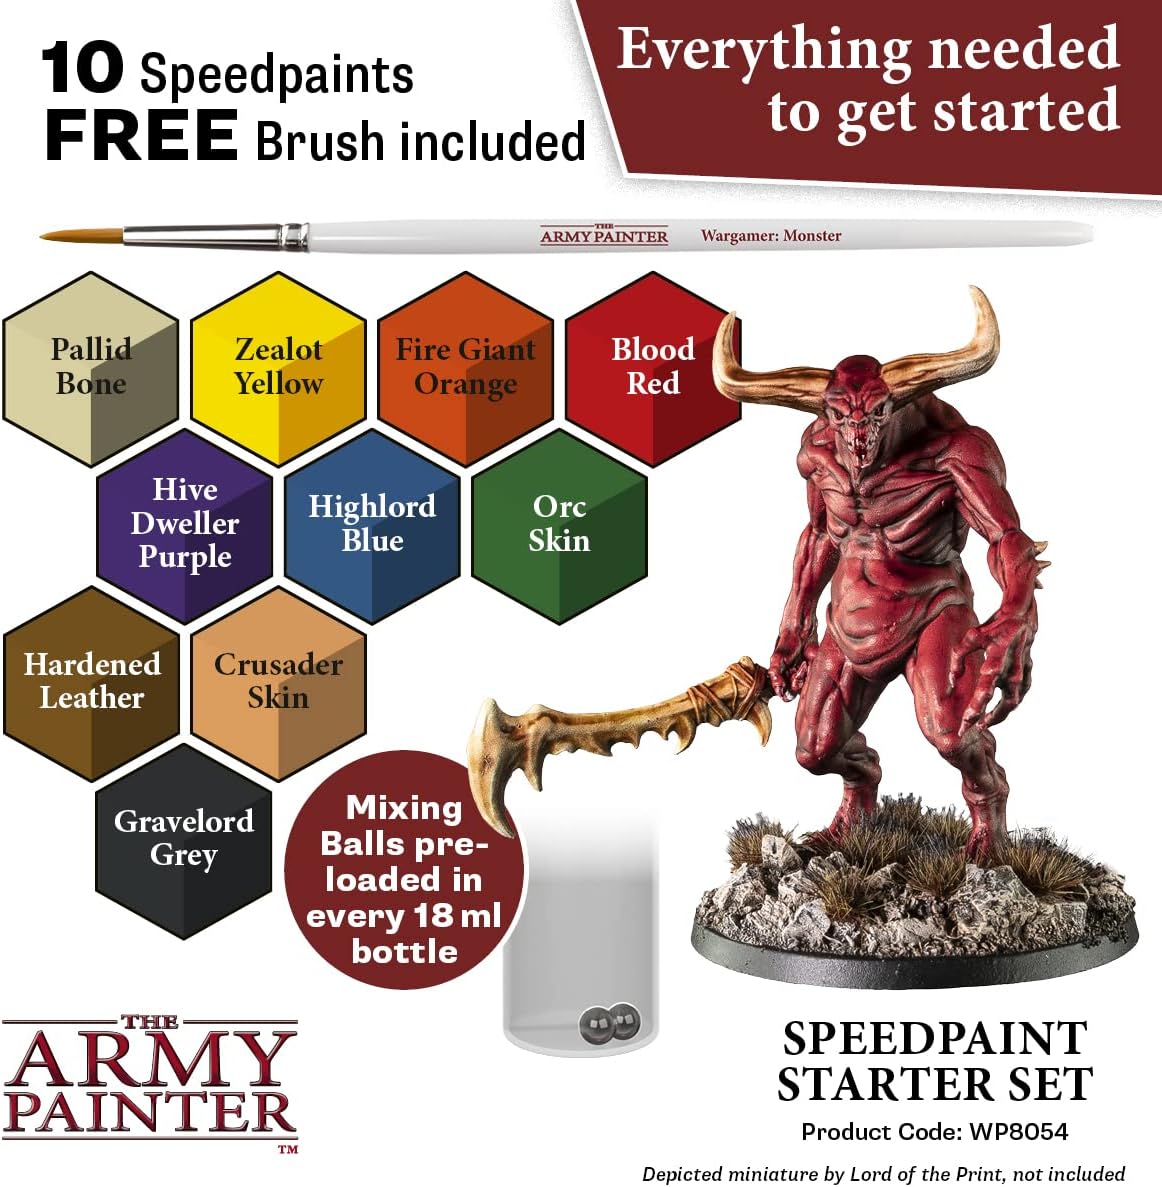 The Army Painter Speedpaint Starter Set - 10x18ml Speed Model Paint Kit Pre Loaded with Mixing Balls and 1 Brush- Base, Shadow and Highlight in One Miniature and Model Paint Set for Plastic Models